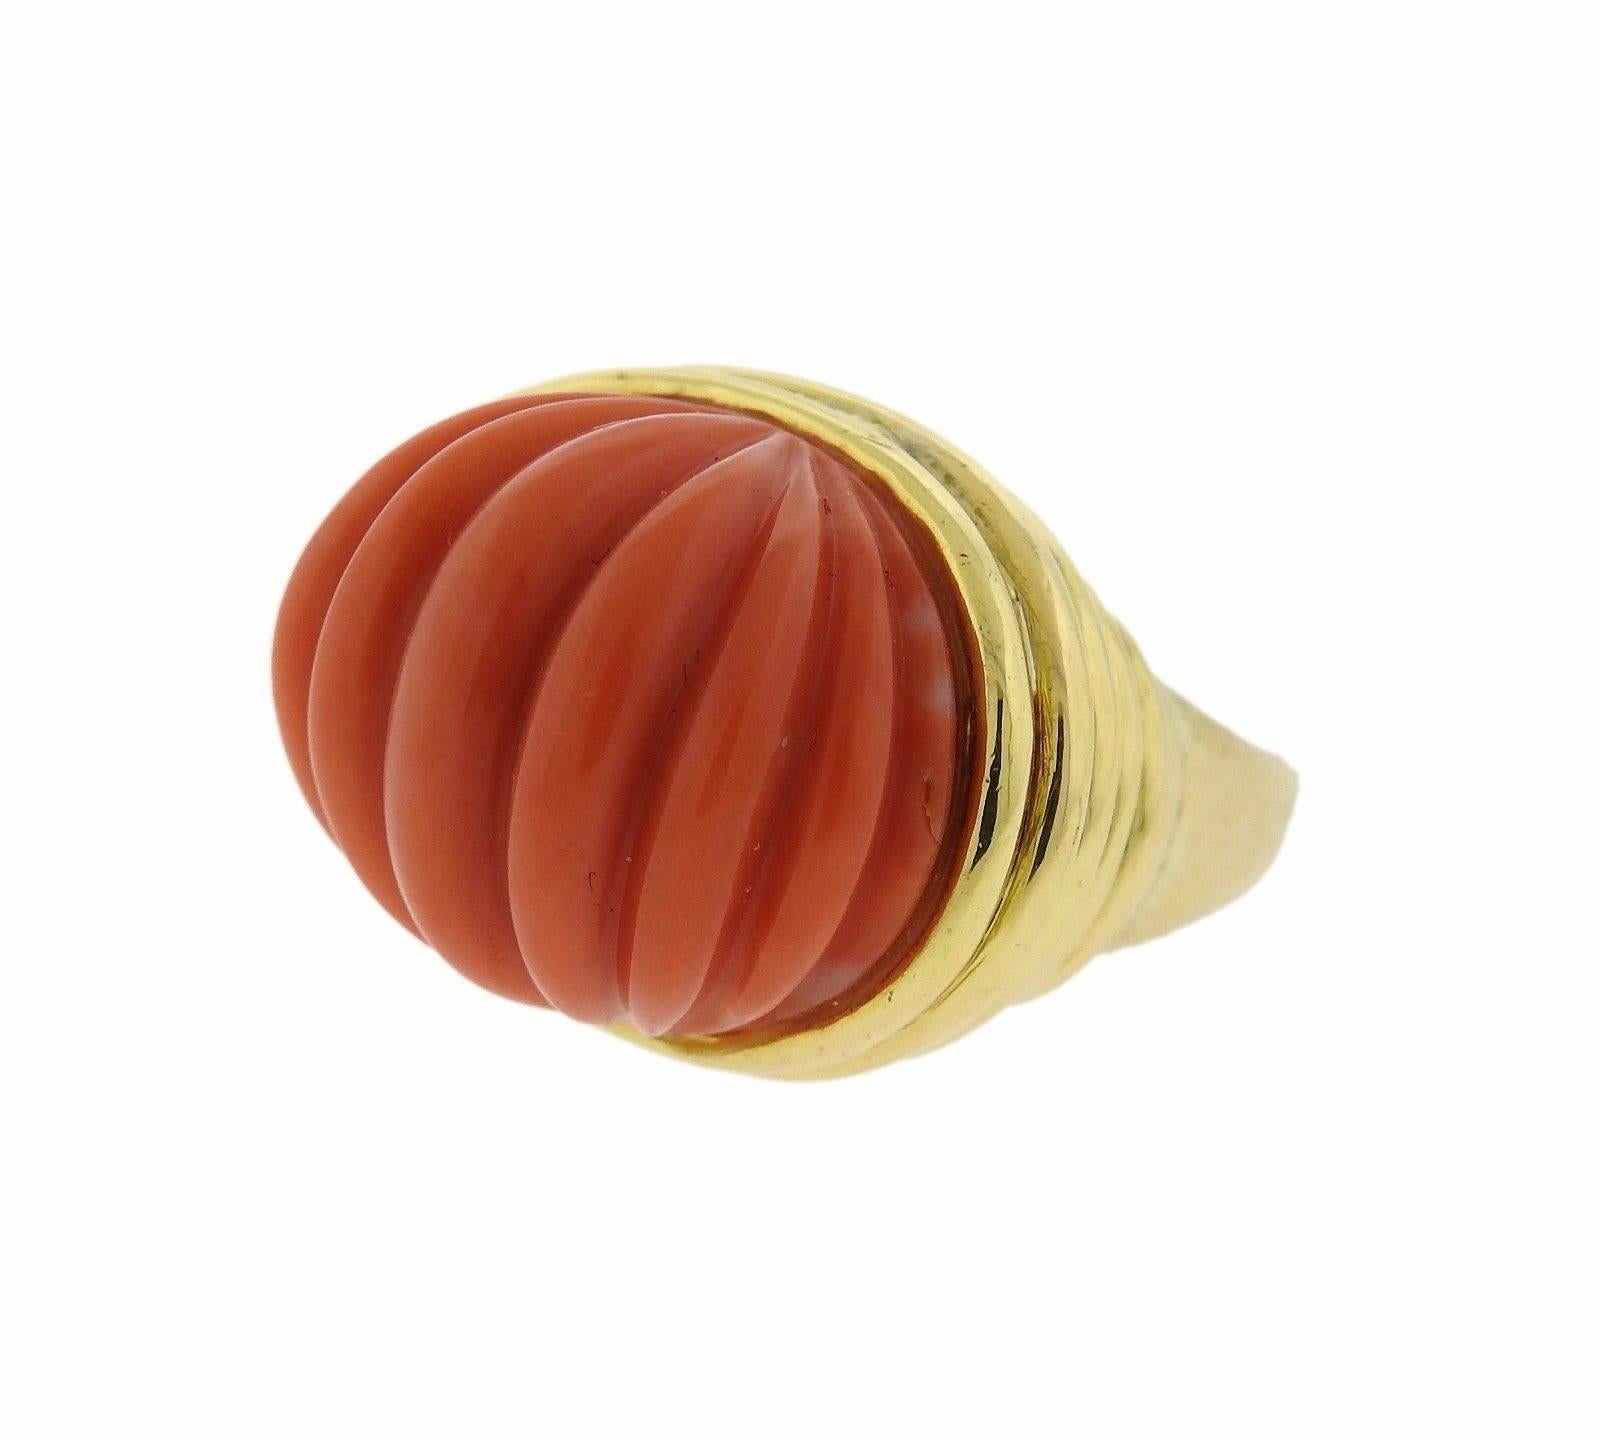 An 18k yellow gold ring set with carved coral.  The ring is a size 7 and weighs 24.9 grams.  The ring top is 20mm x 27mm and sits 17mm from the finger.  Marked: David Webb, 18k.